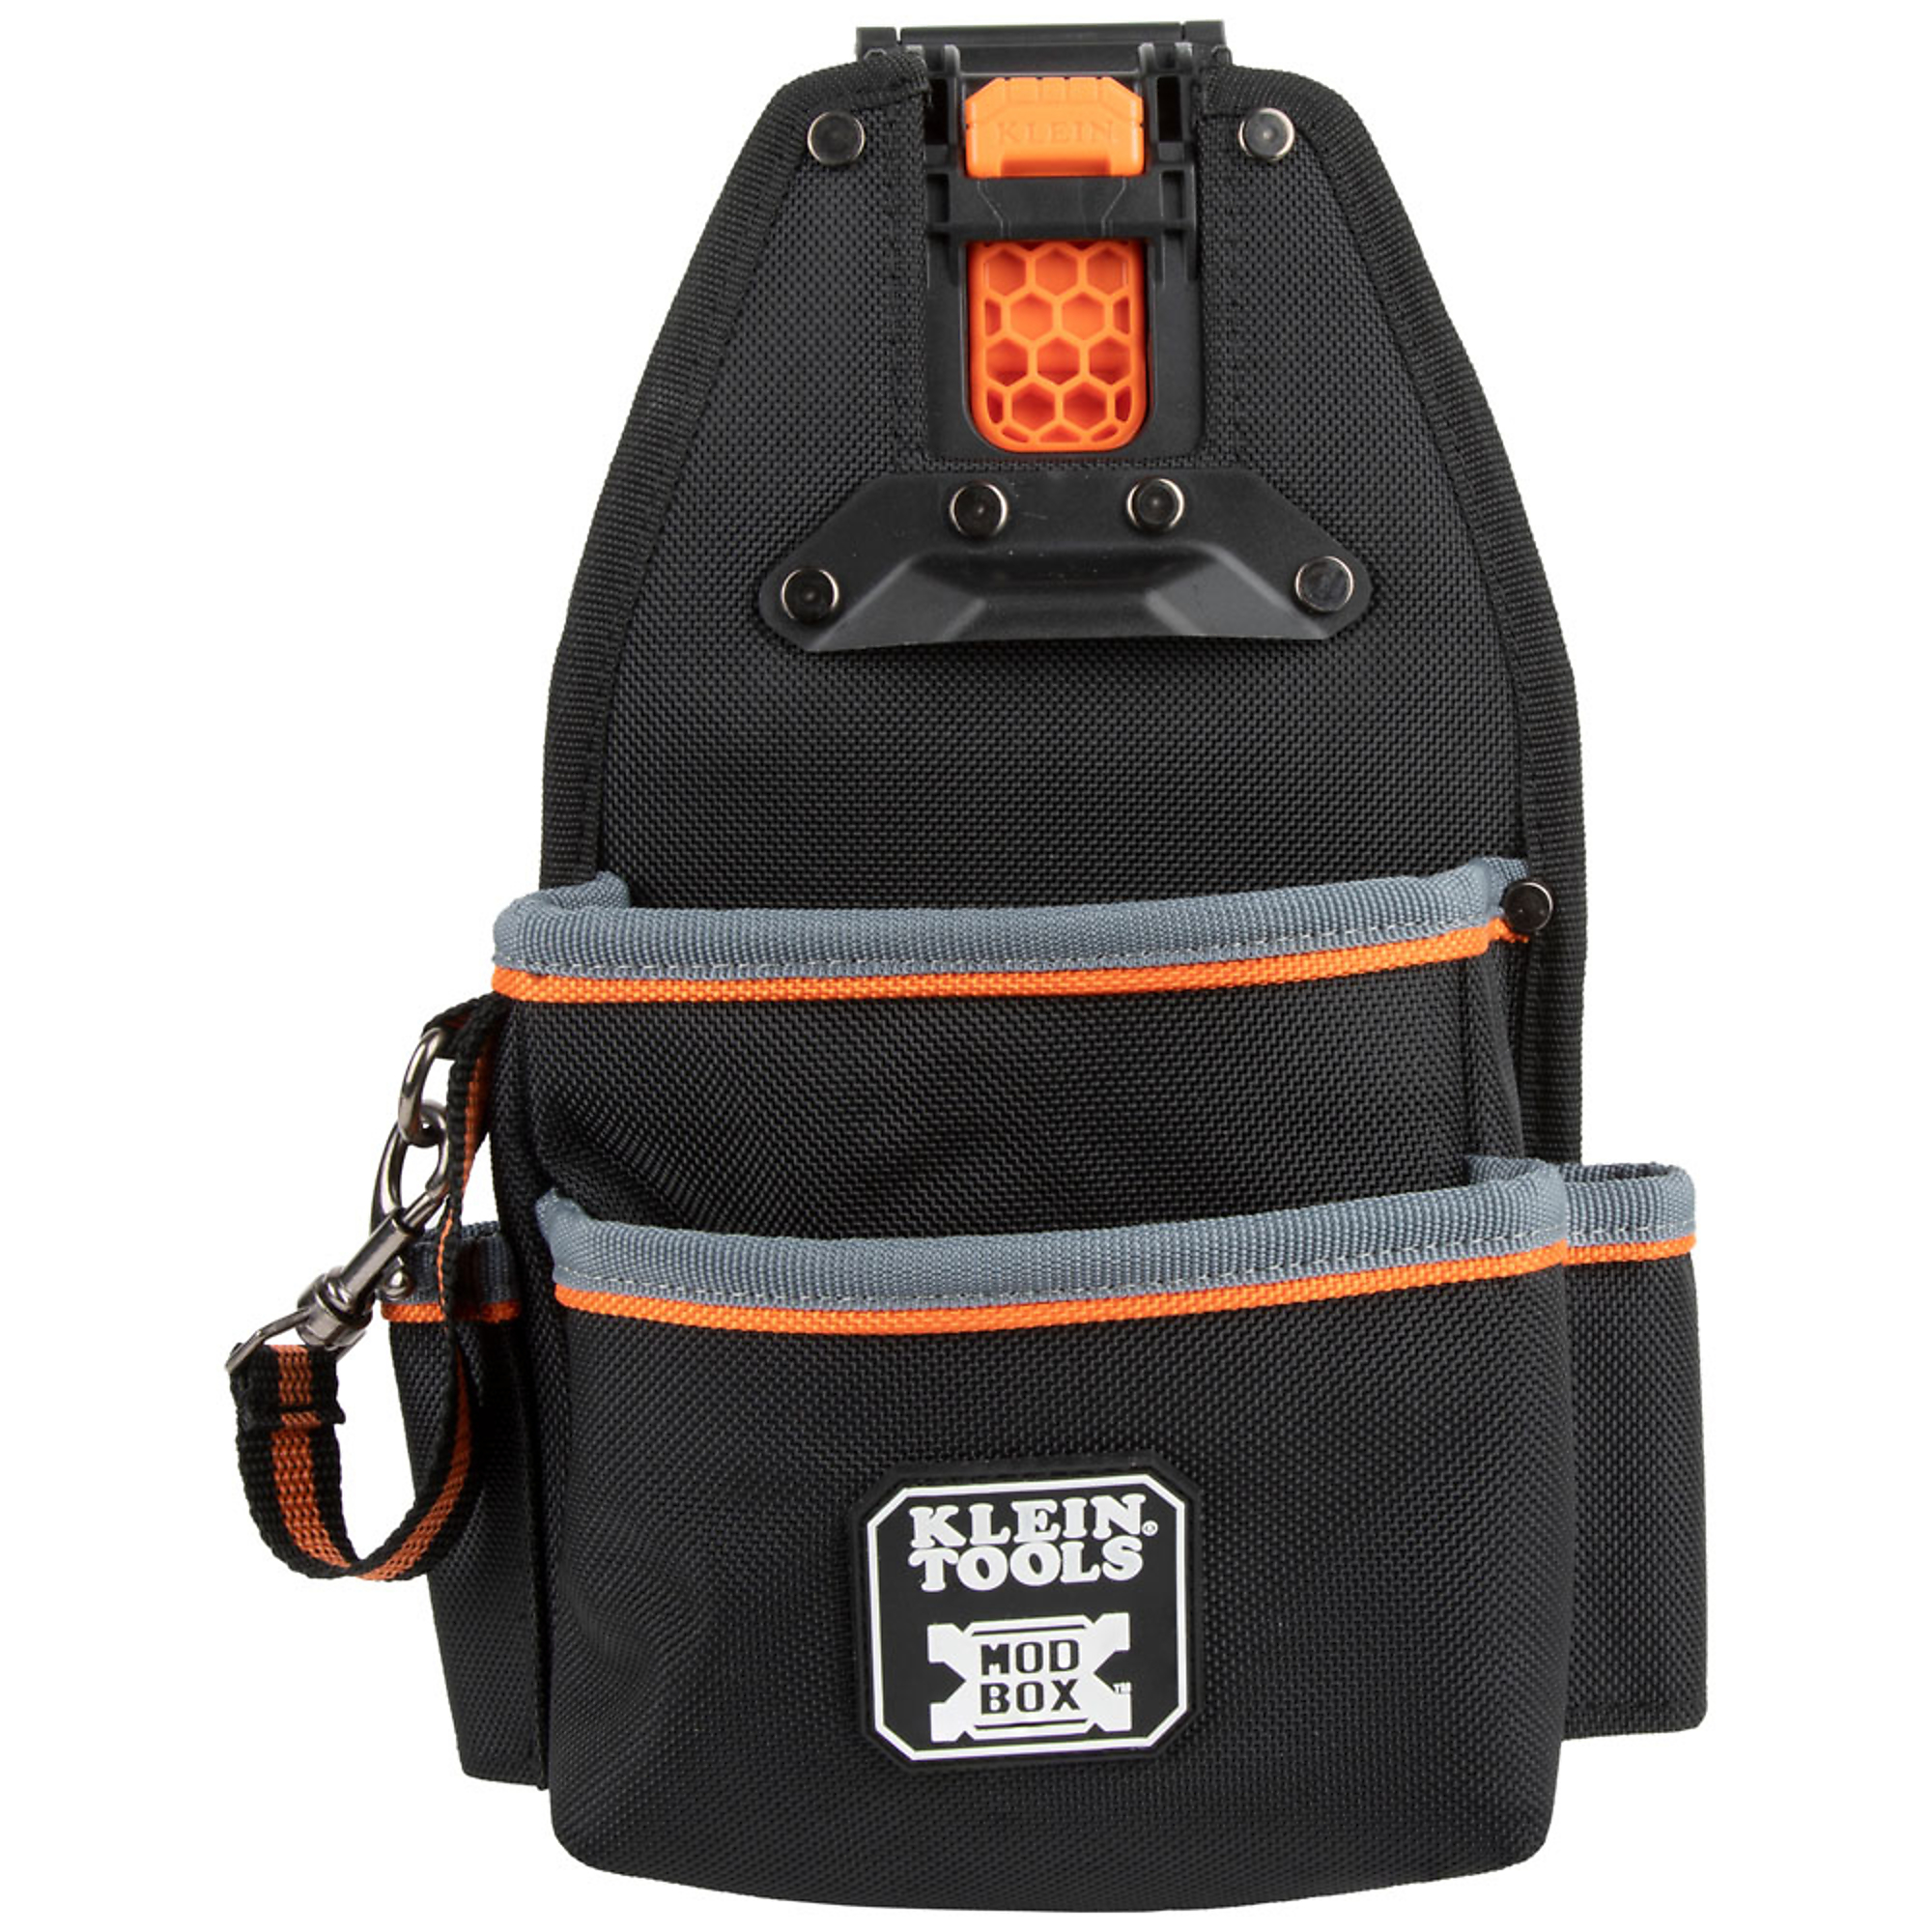 Klein Tools, MODbox Open Tool Pouch, Color Black, Pockets (qty.) 4 Material Nylon, Model 55833MB